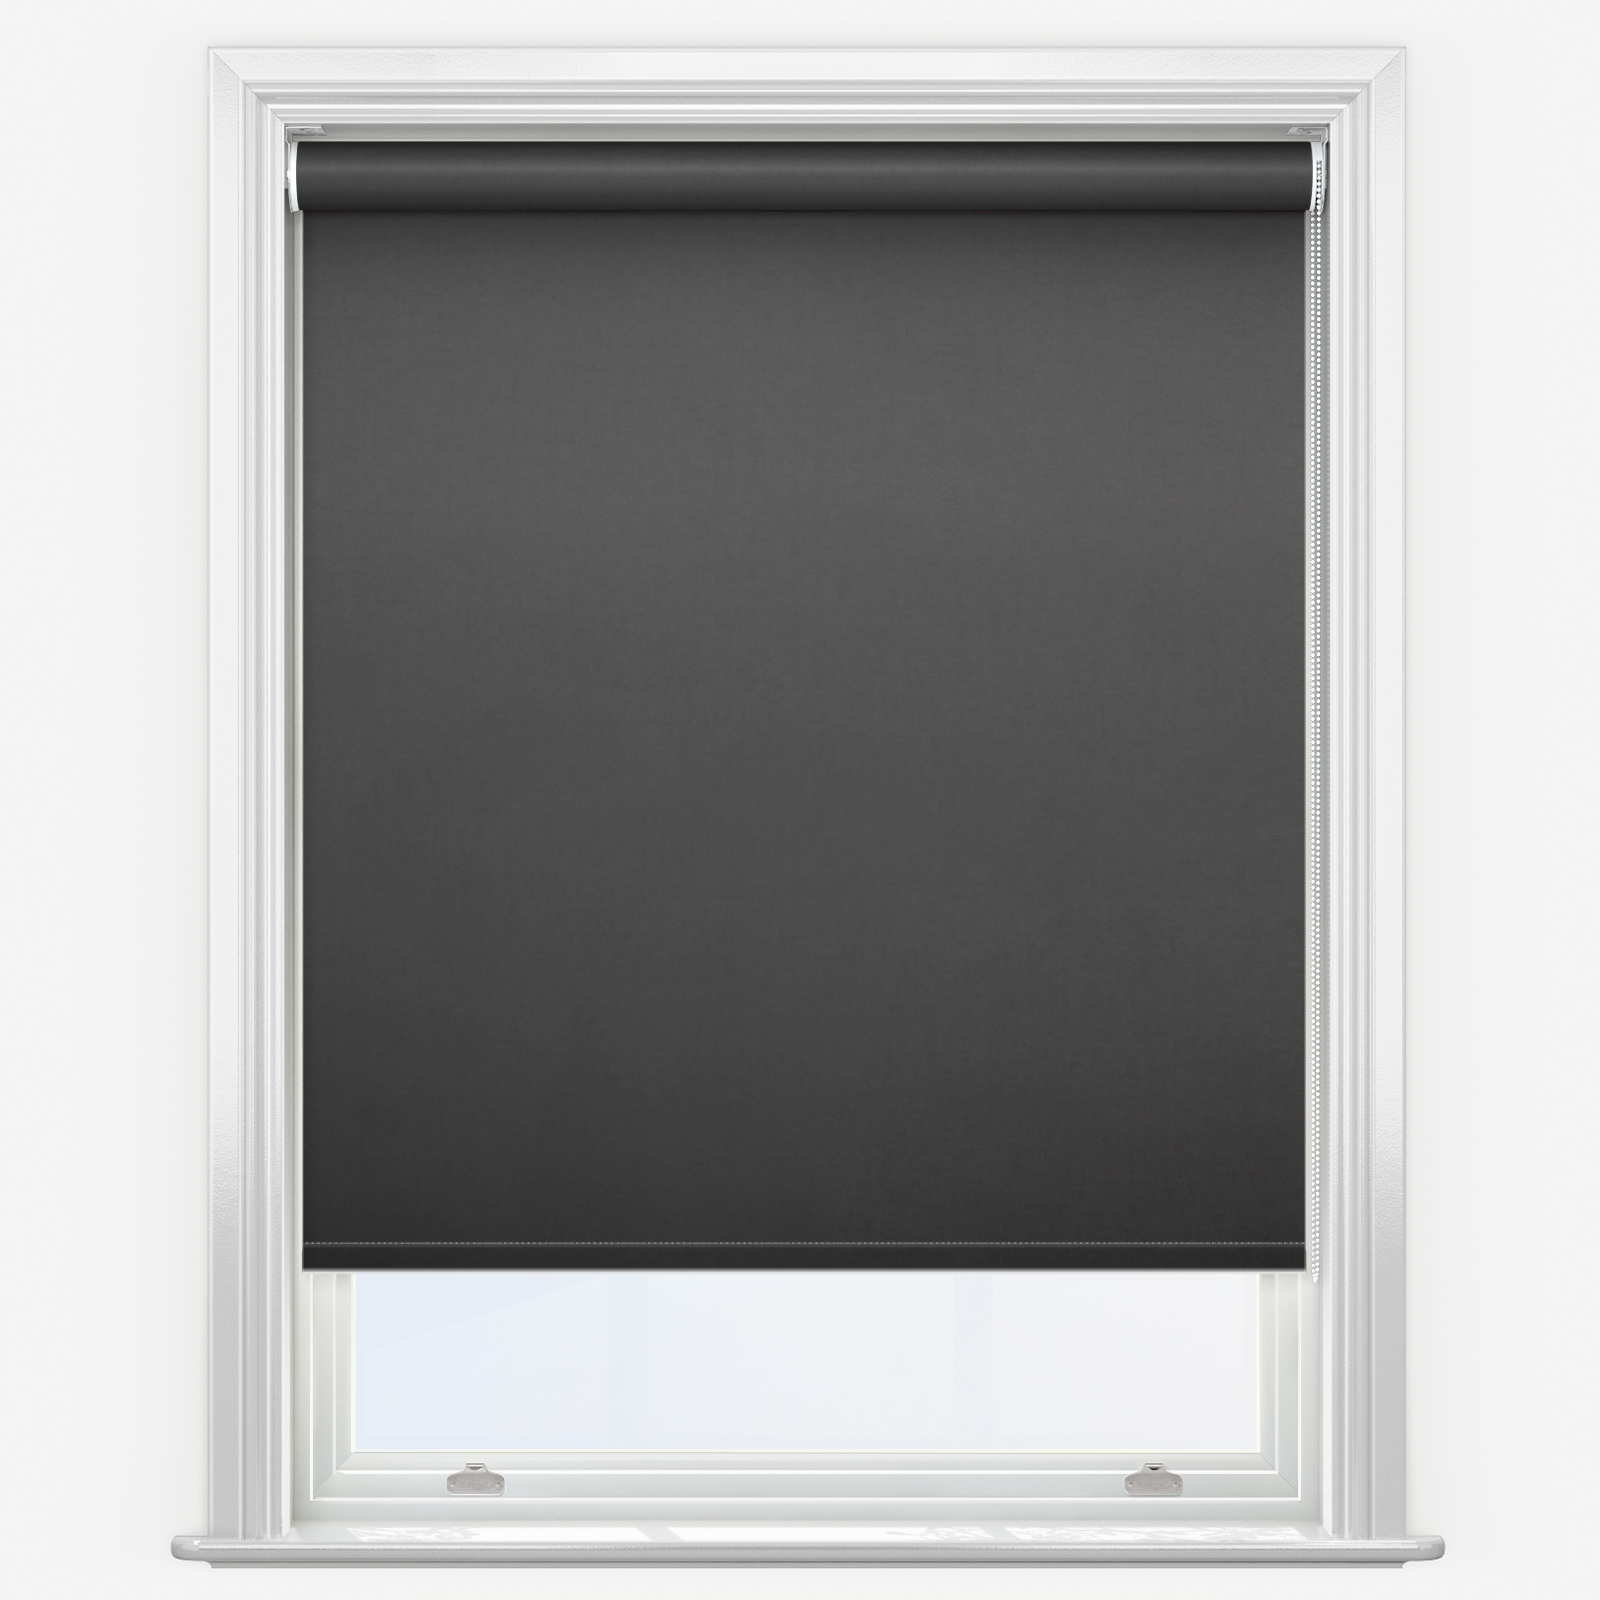 https://img.interiorgoodsdirect.com/image-system/zoom/rollers/rollers-extended/window/touched_by_design_spectrum_blackout_anthracite.jpg